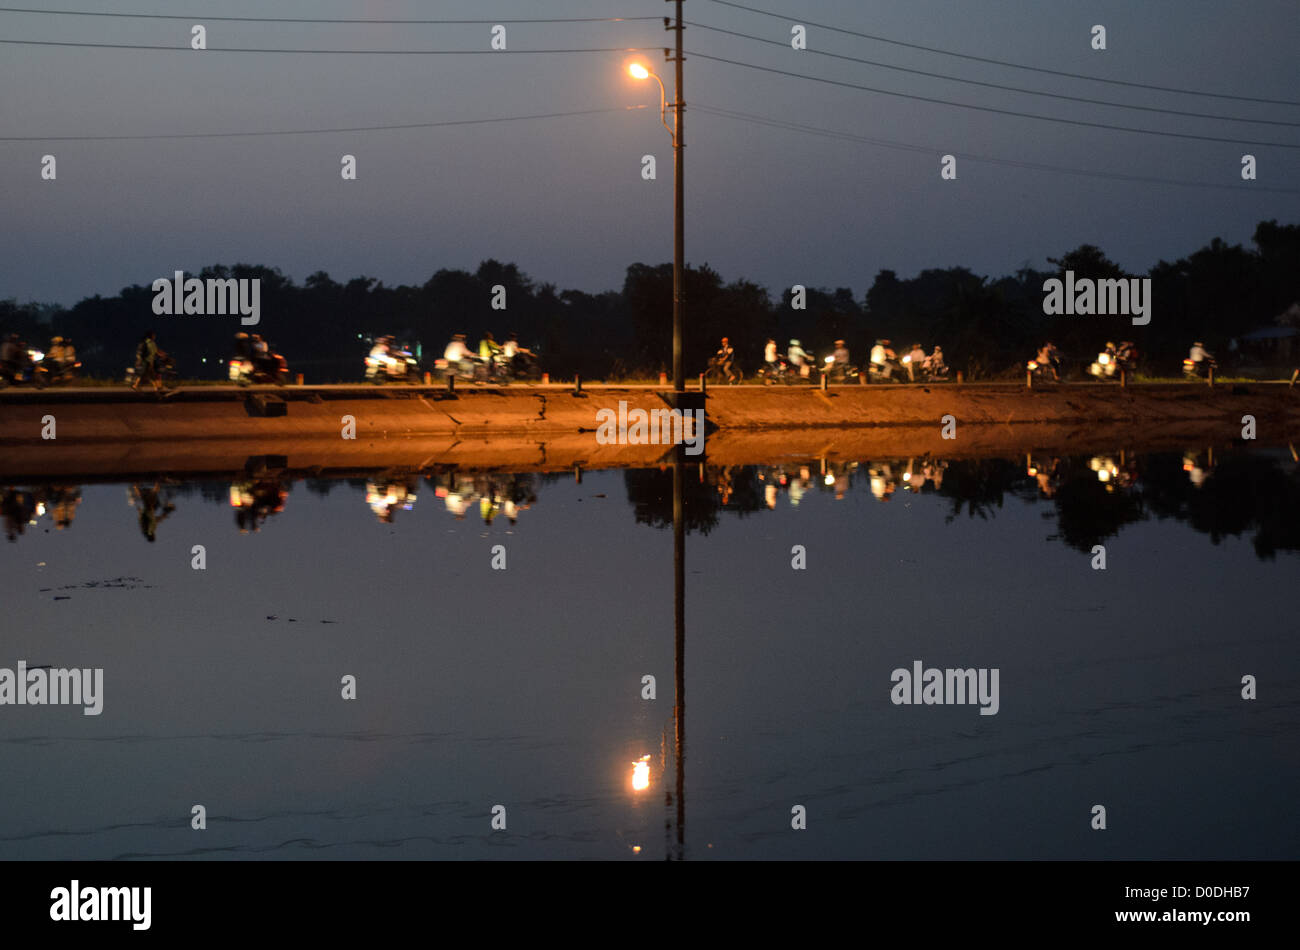 HUE, Vietnam - Evening traffic rushes over a thin embankment of the Perfume River in Hue, Vietnam, reflected on the glassy water. Stock Photo